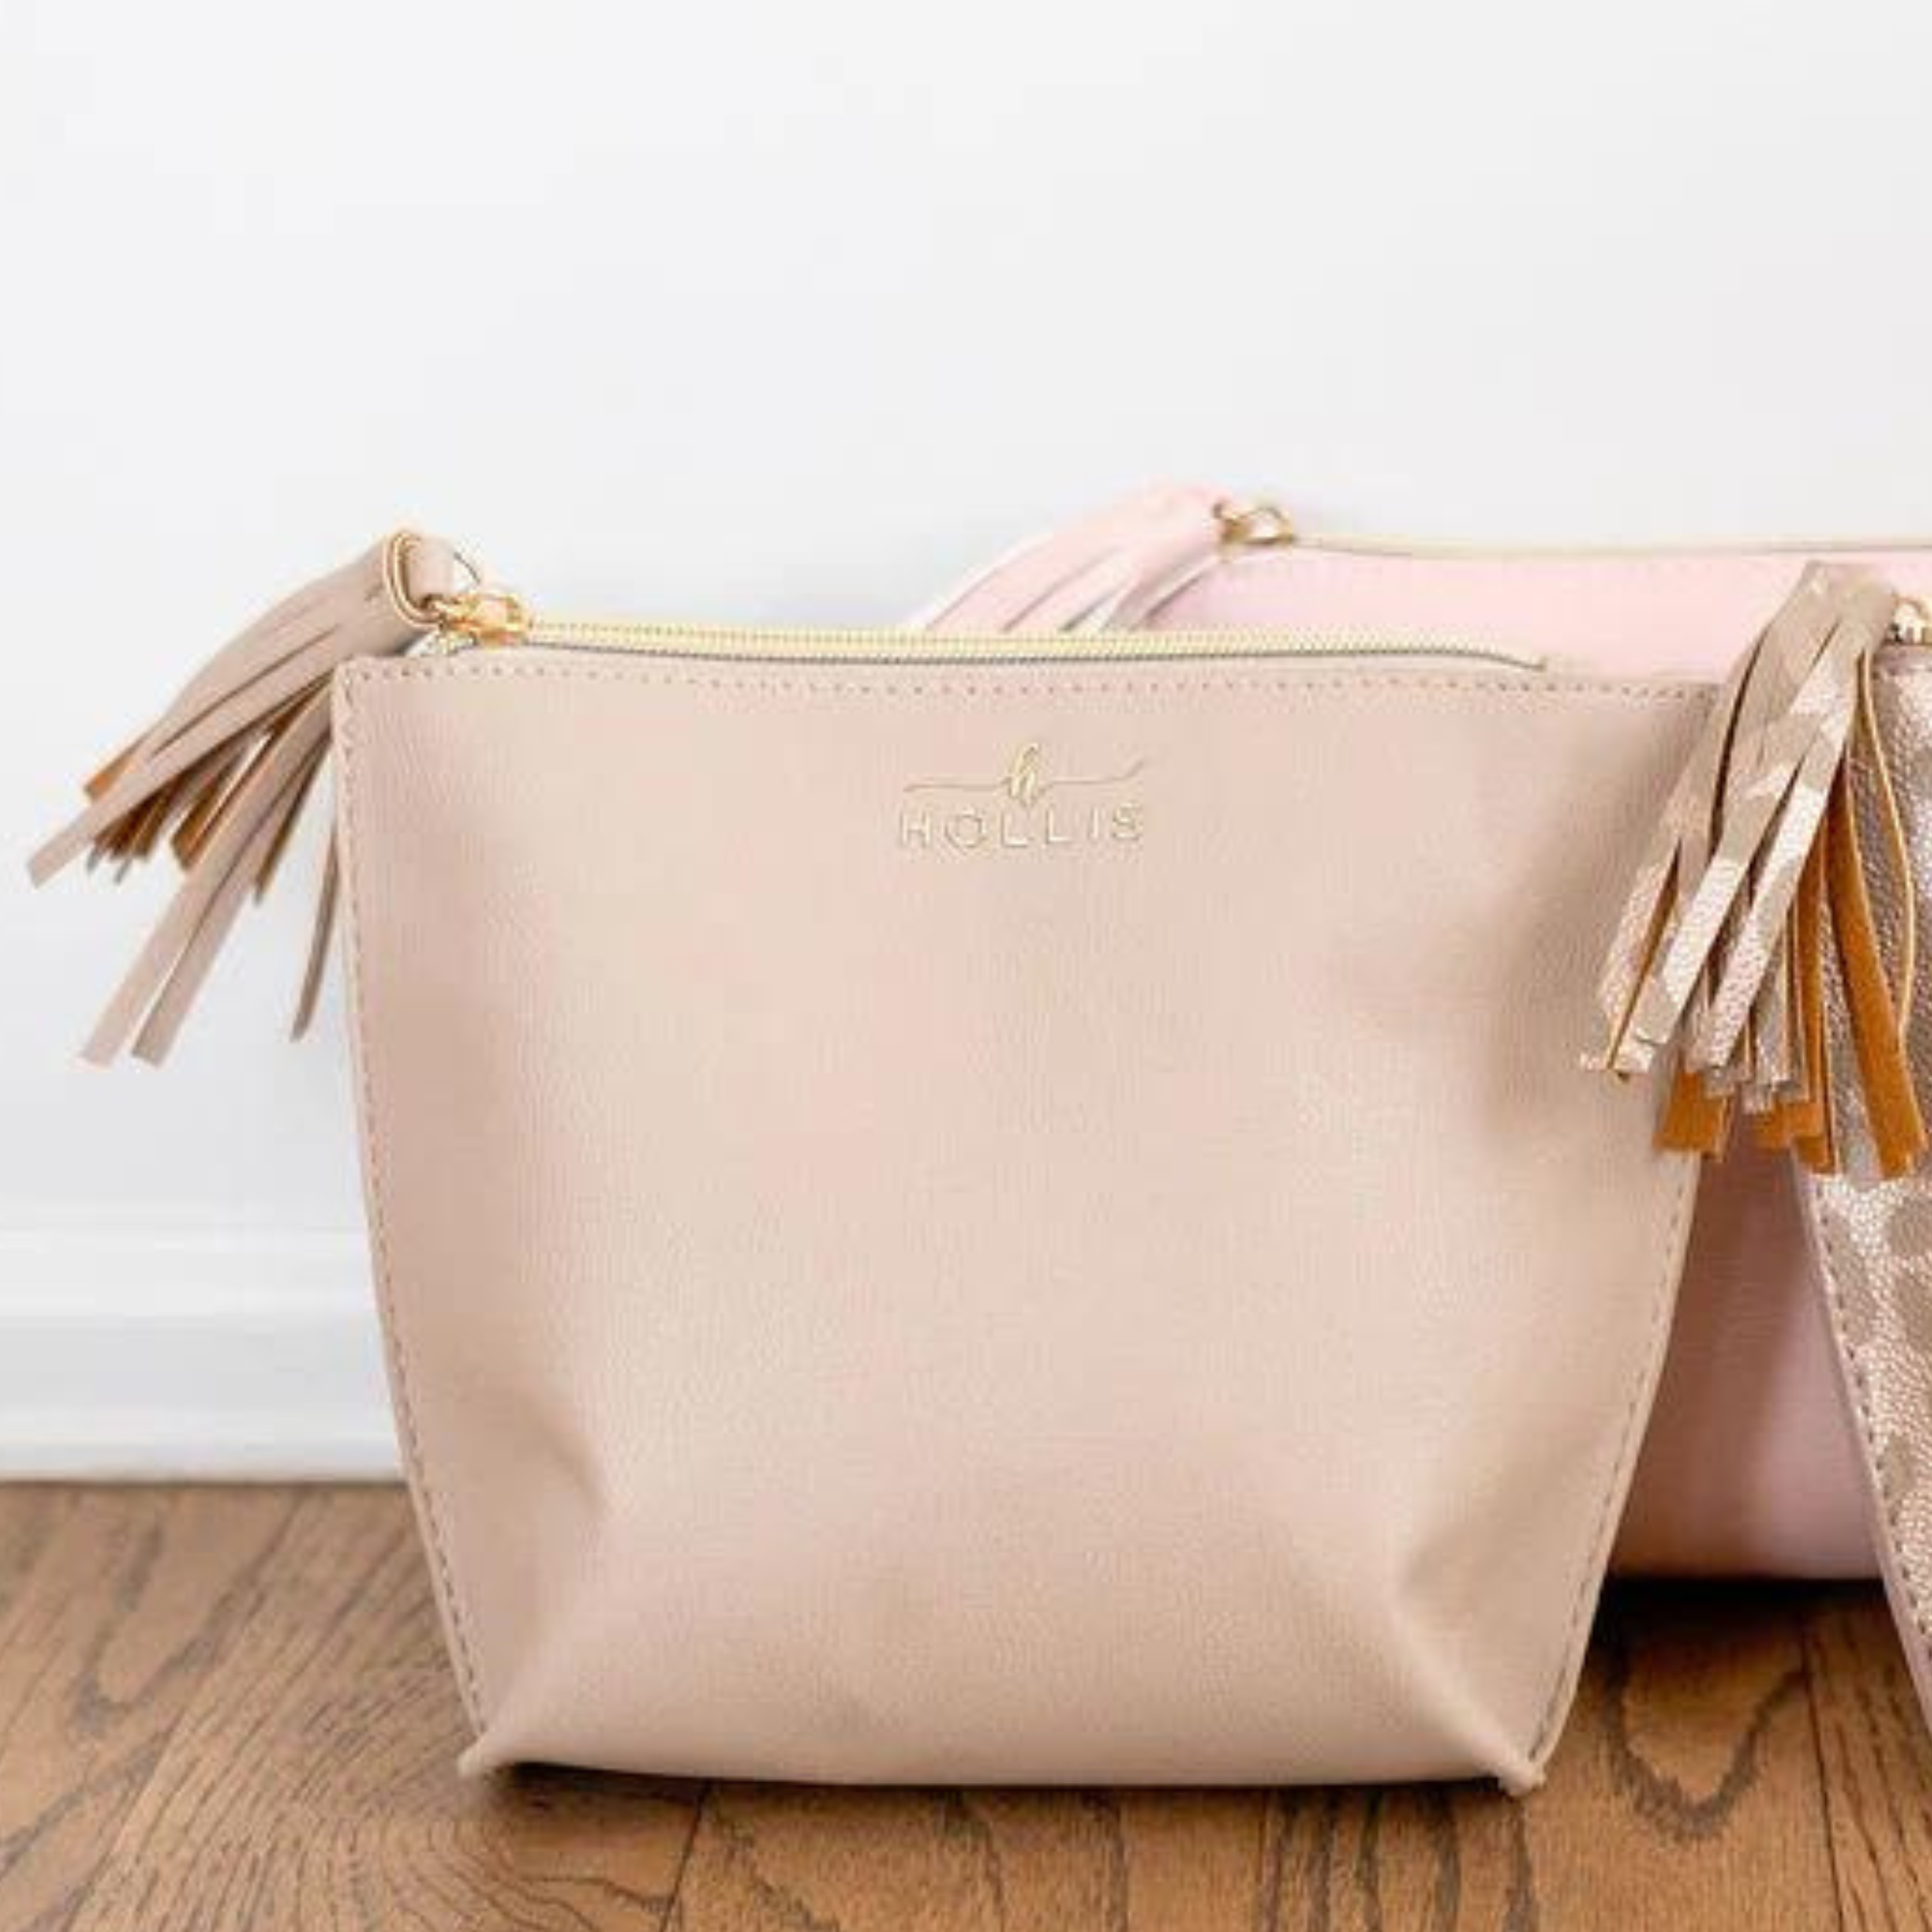 Hollis | Holy Chic Bag in Nude - Giddy Up Glamour Boutique